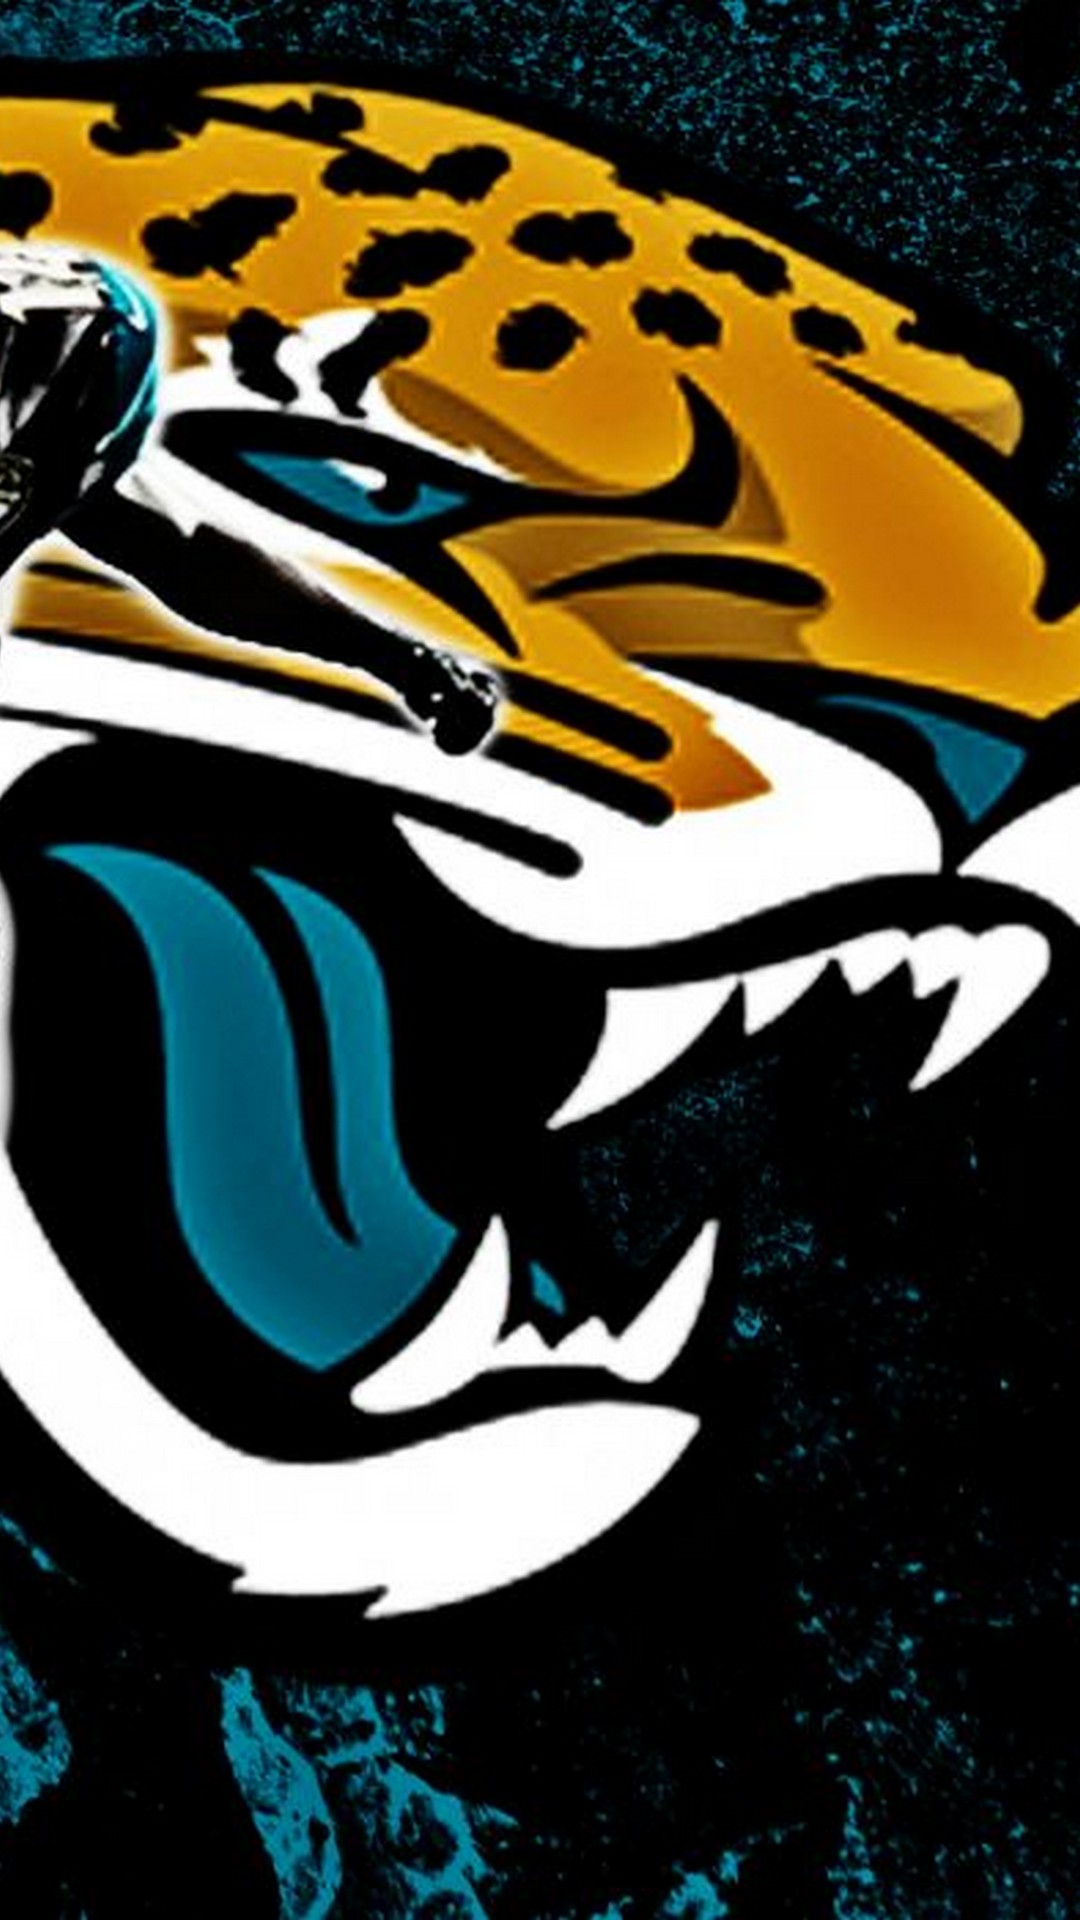 Screensaver iPhone Jacksonville Jaguars With high-resolution 1080X1920 pixel. Donwload and set as wallpaper for your iPhone X, iPhone XS home screen backgrounds, XS Max, XR, iPhone8 lock screen wallpaper, iPhone 7, 6, SE, and other mobile devices